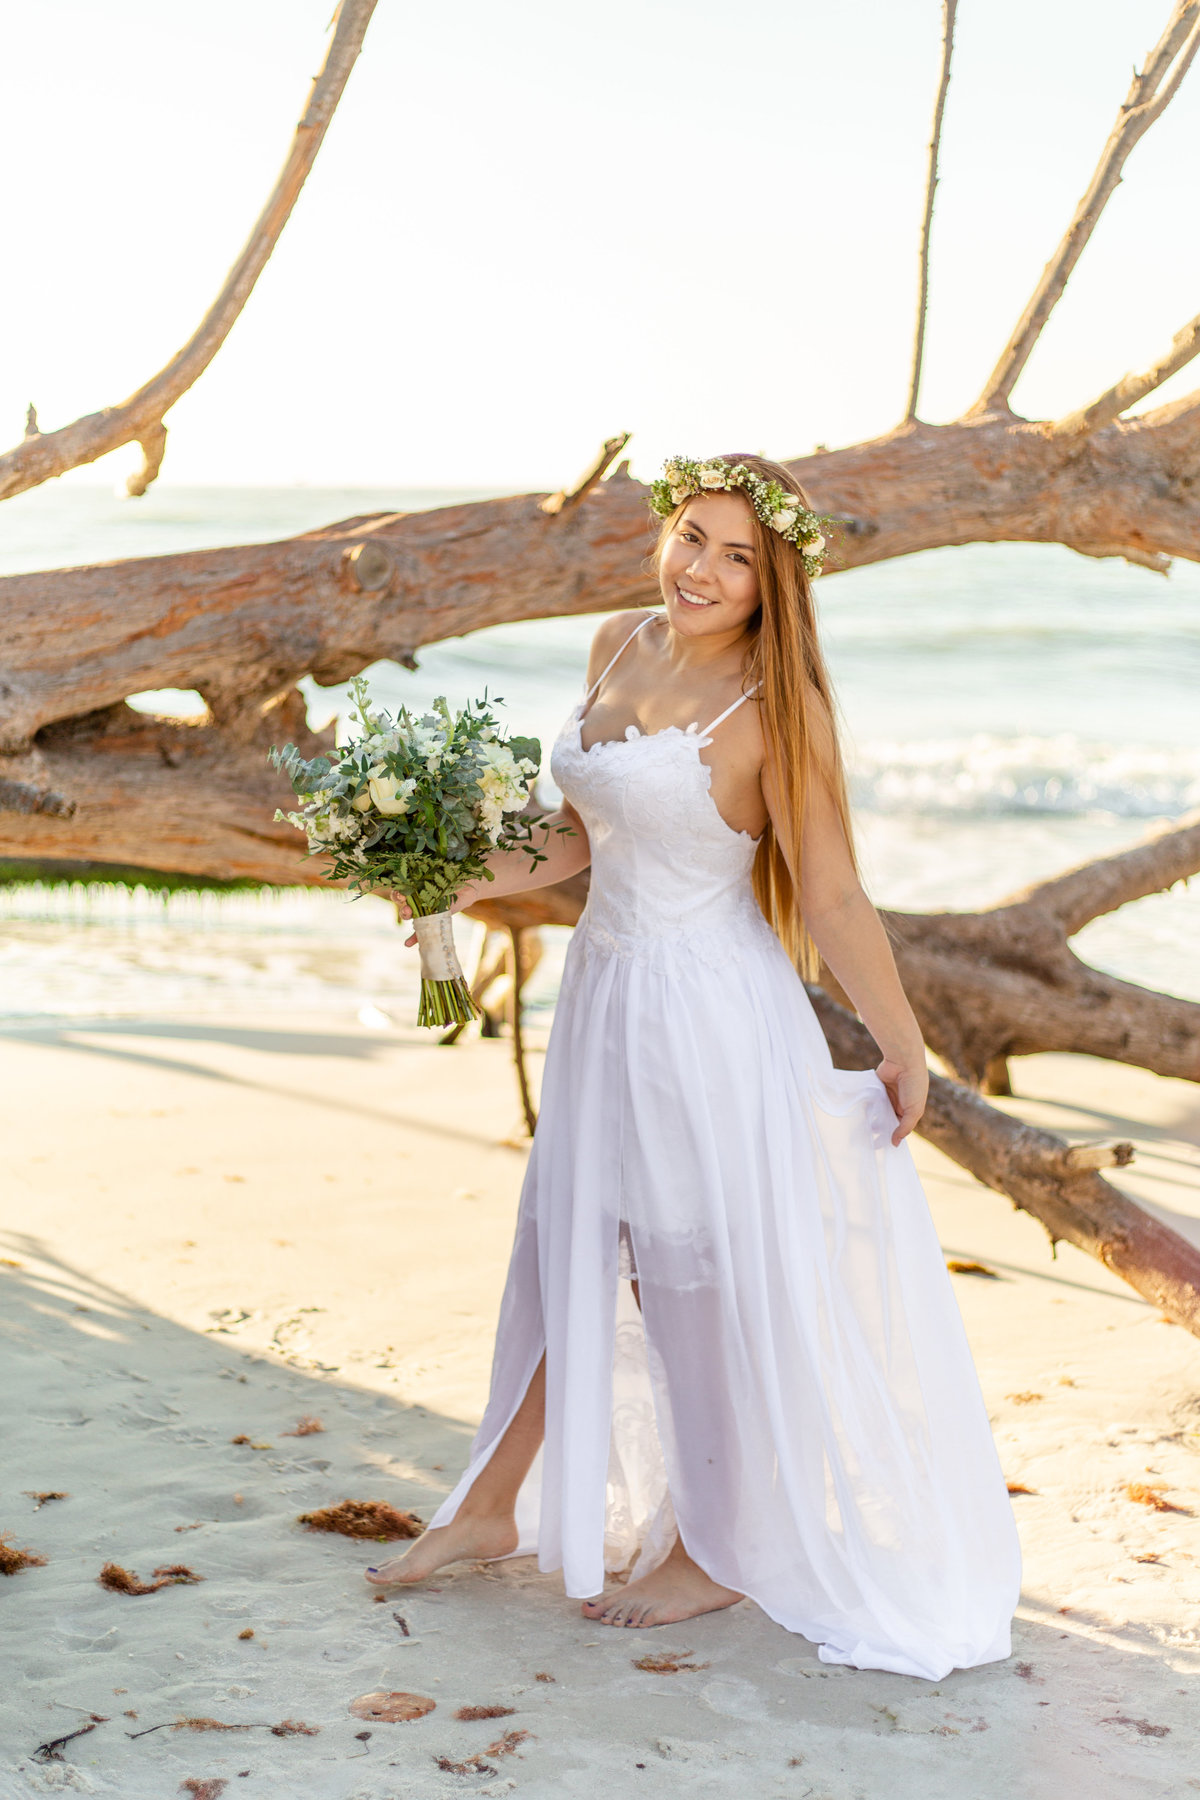 Bride holds green and white bridal bouquet in her white wedding dress at her beach wedding in St. Petersburg, Florida